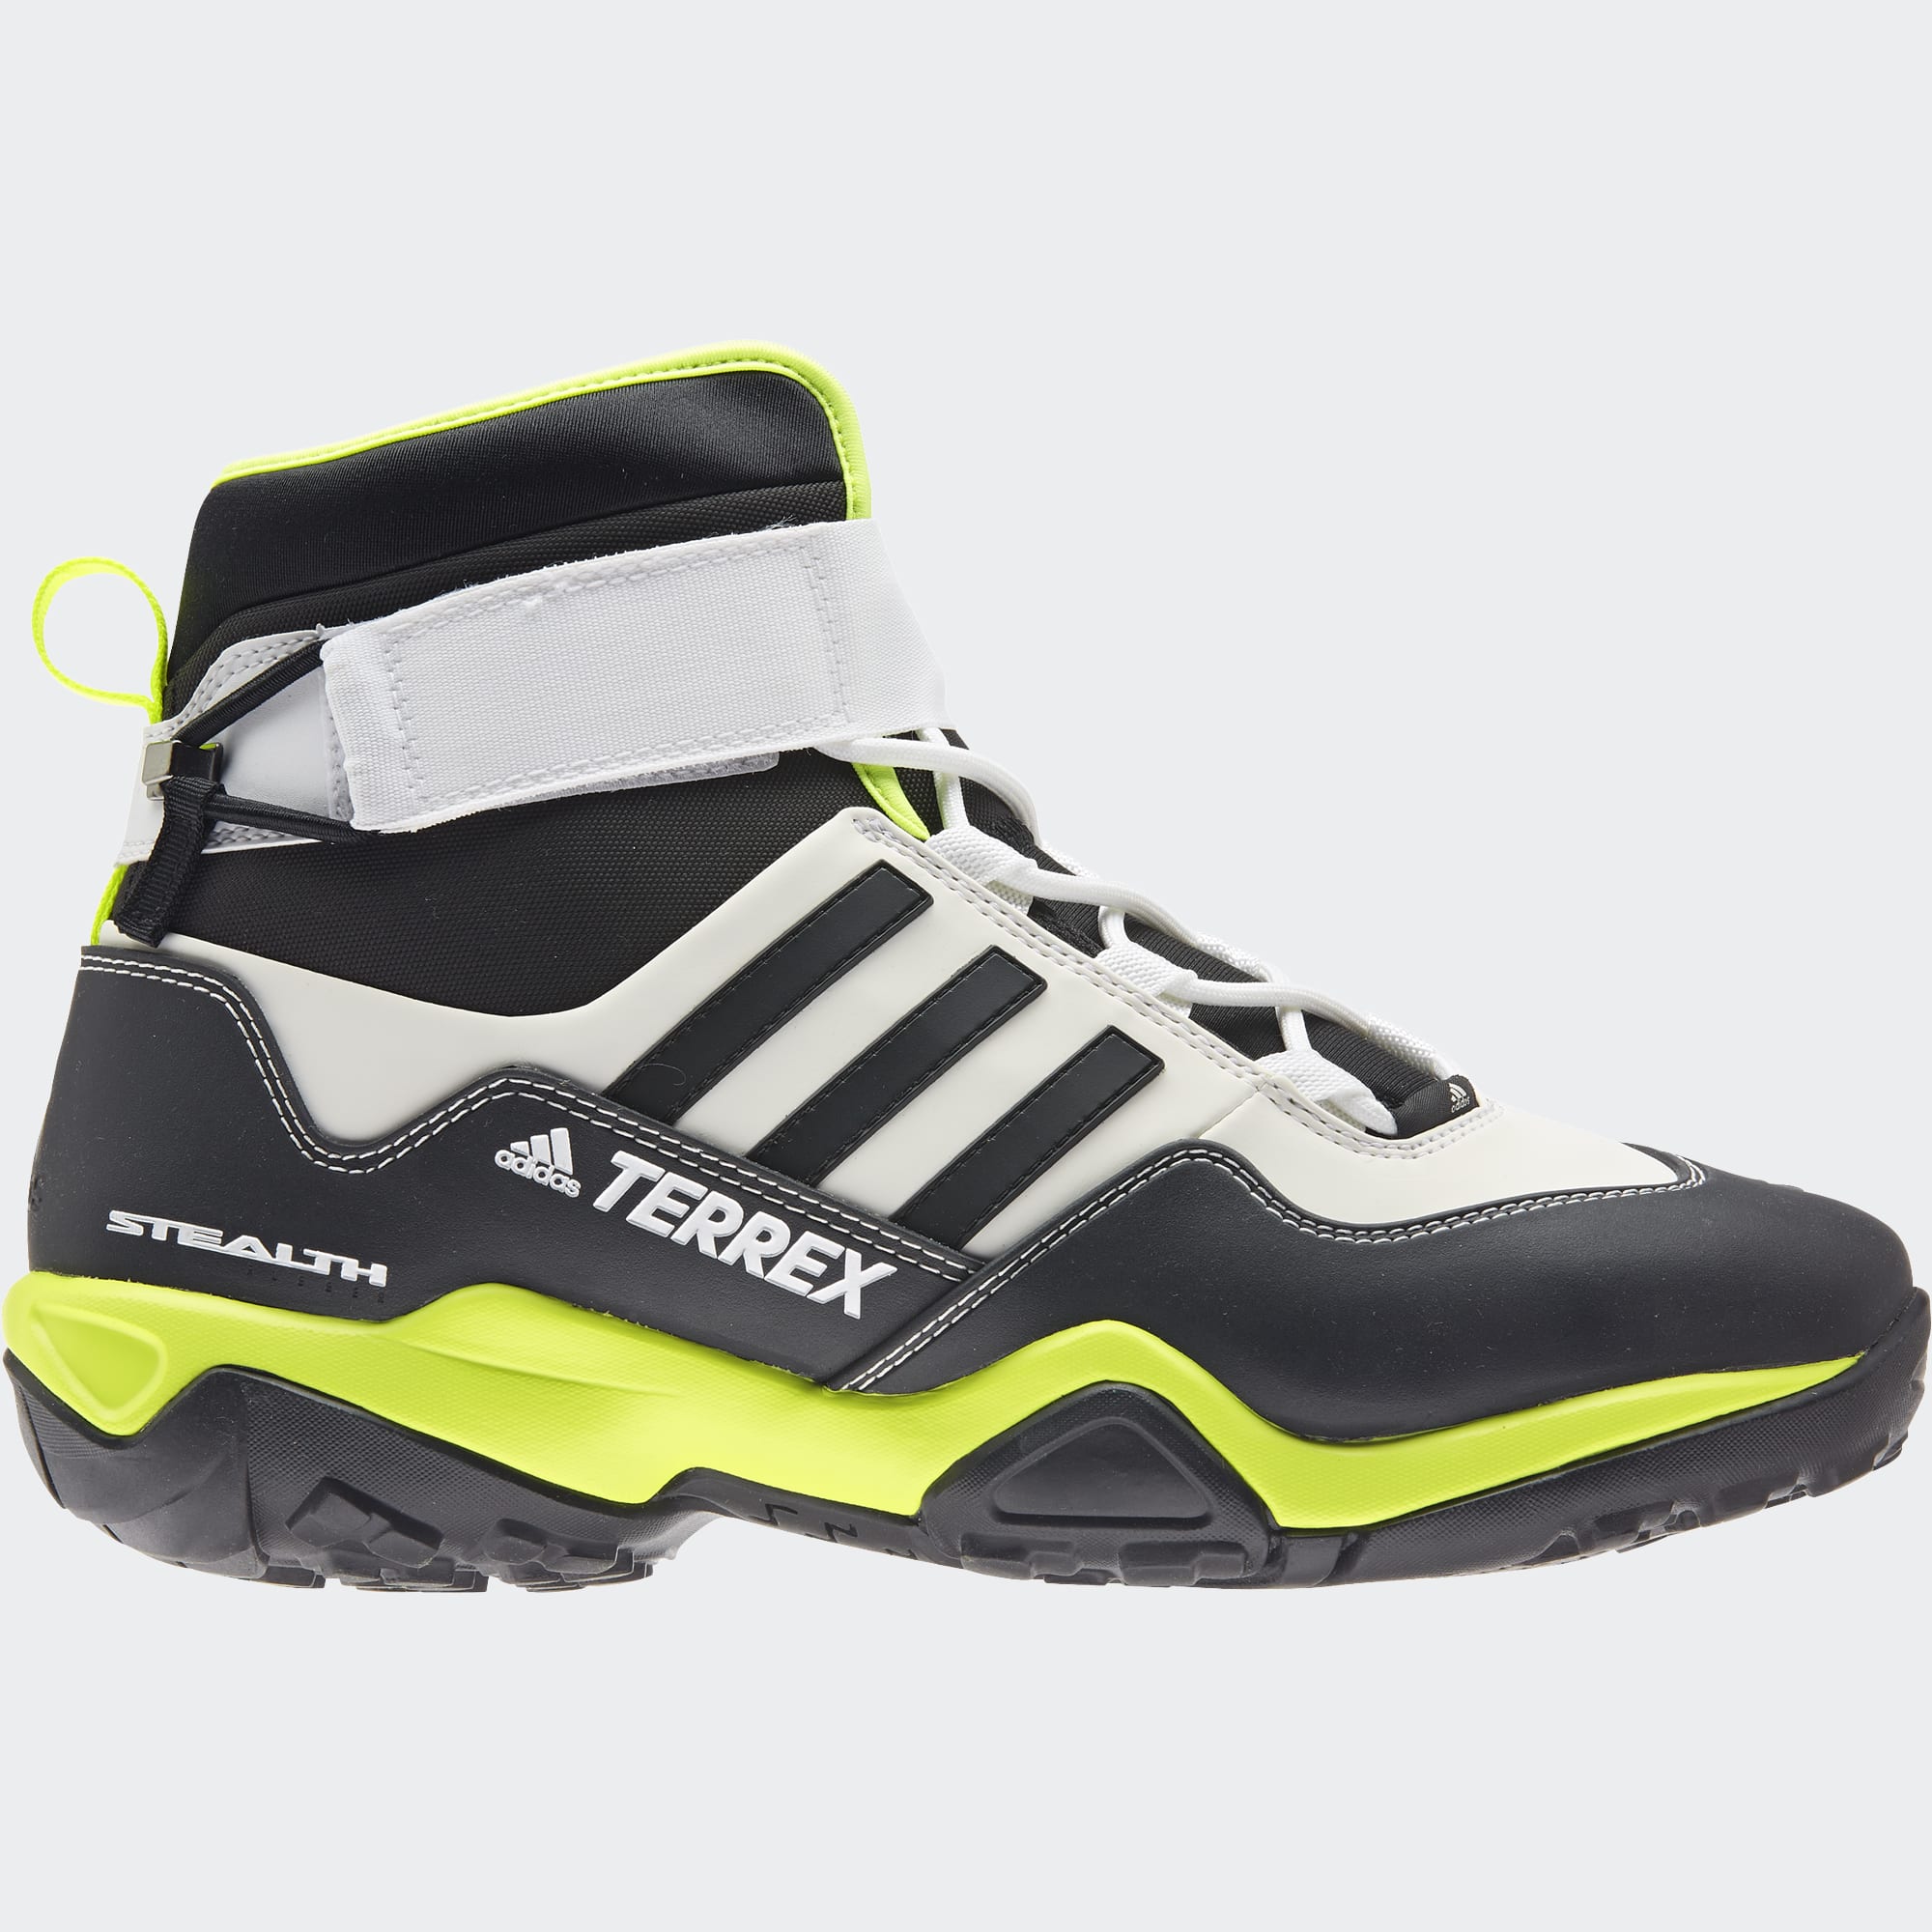 Adidas Terrex Hydro Lace canyonshoes 